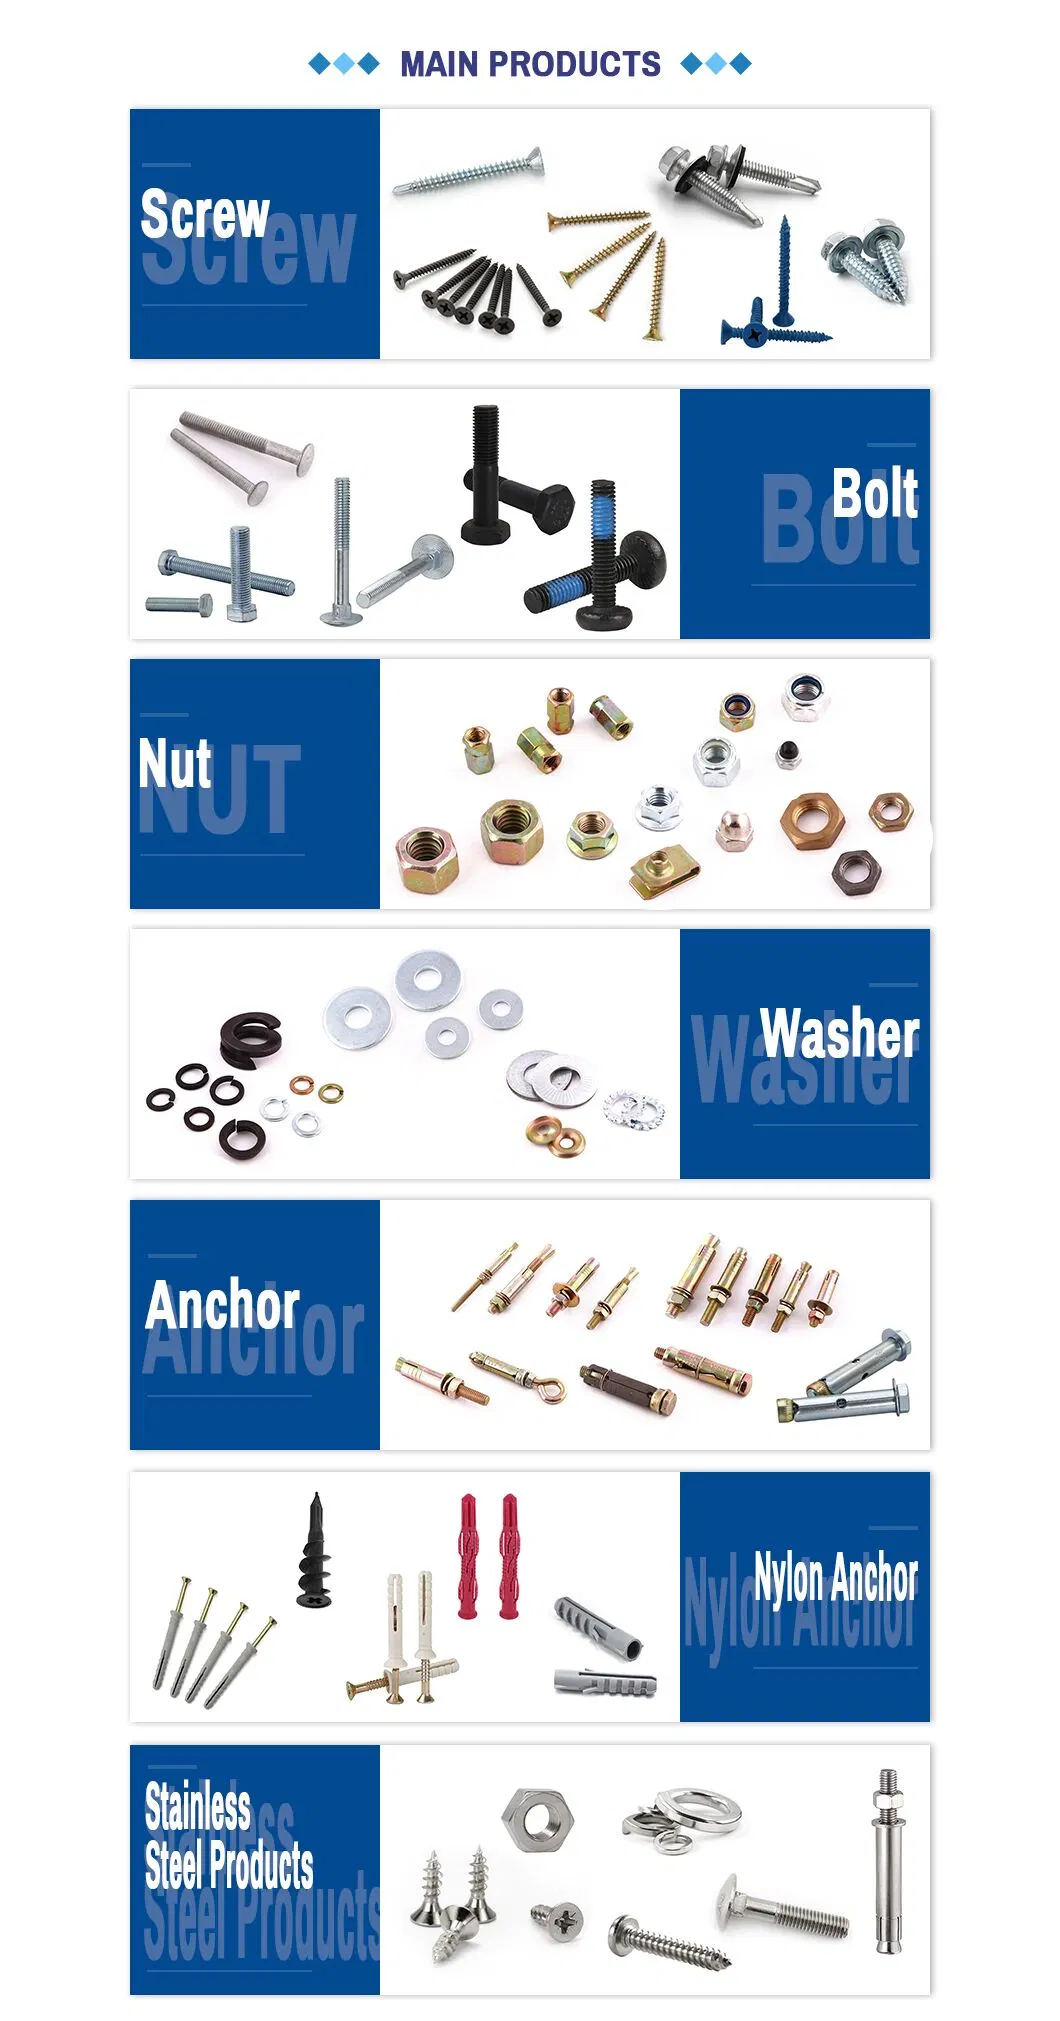 Support Express Sea Freight Land. Air Wafer Head Self Drilling Screw